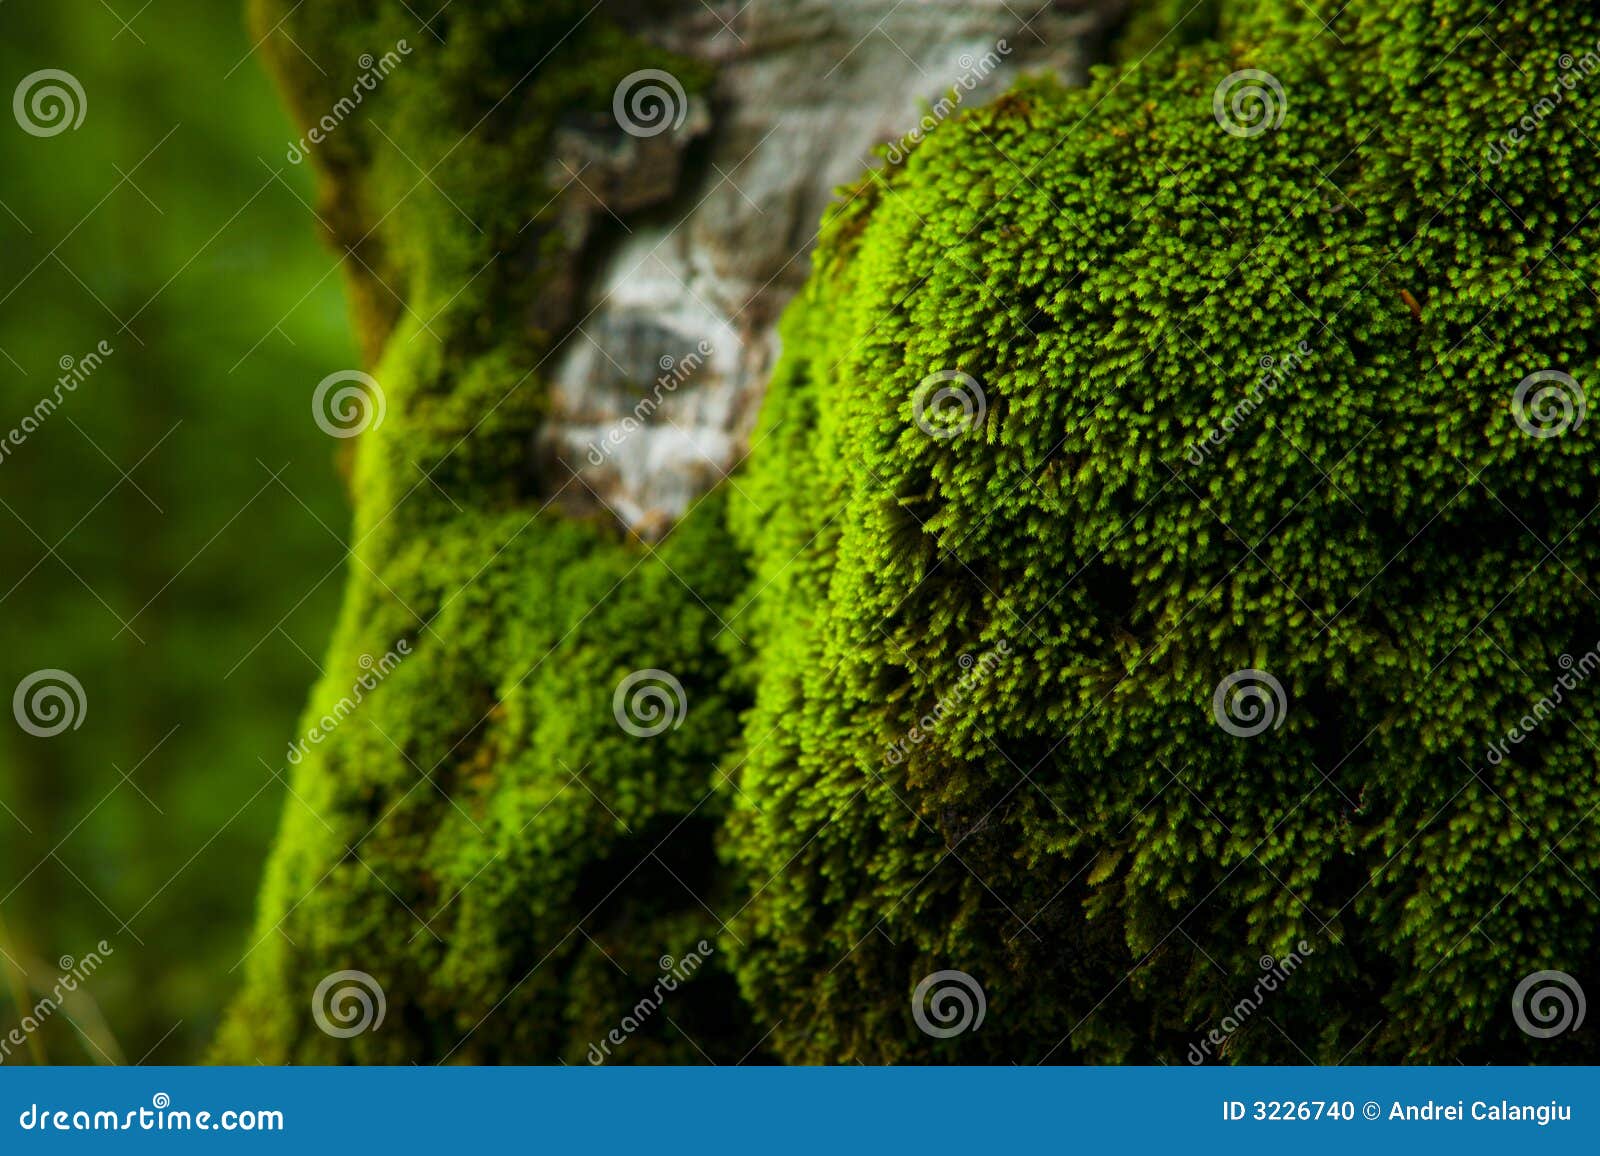 thick moss